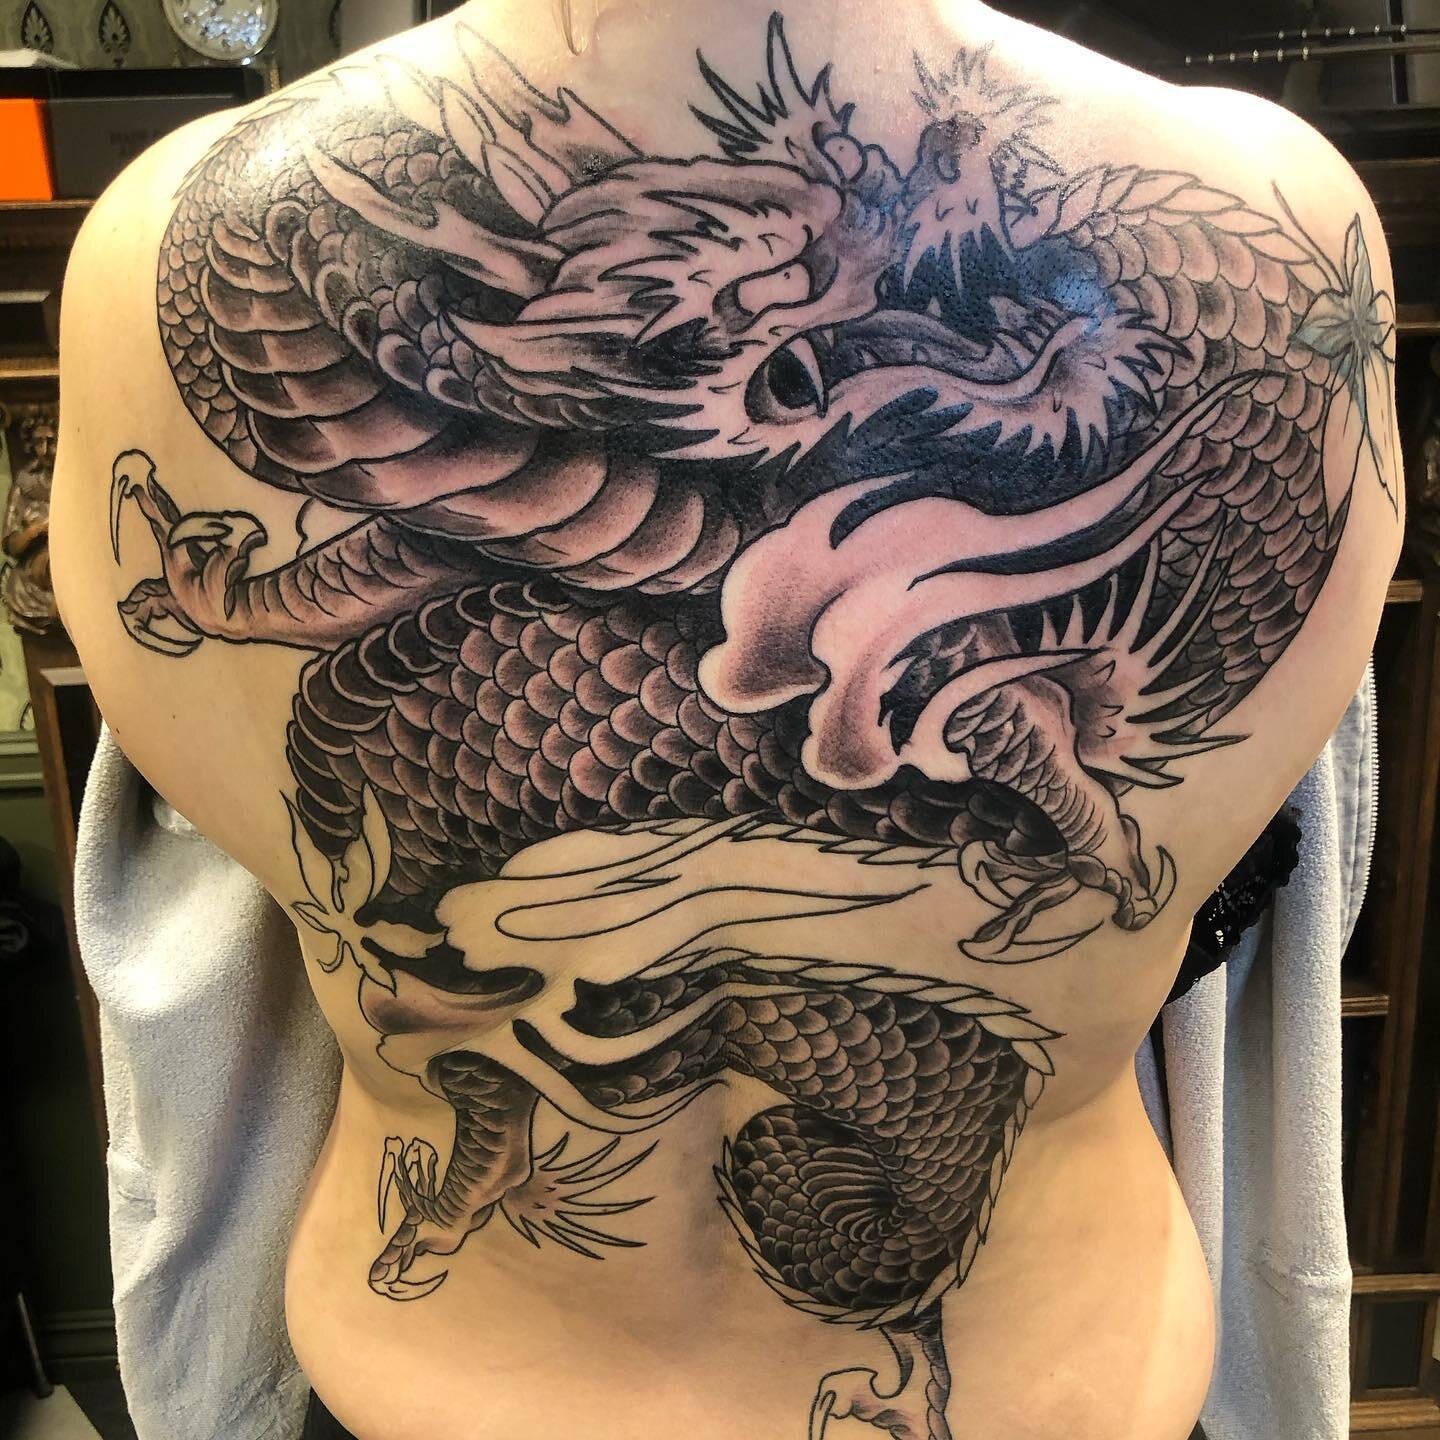 Started shading on this one. Still a bit to go, but we&rsquo;re getting there. Thanks for the trust!

Done at @letsbuzztattoo #letsbuzztattoo #bergen #Norway #tattoobergen #tatovering #norwegiantattooers  #ink #norwaytattoo #tattoo #tattooartist #tat